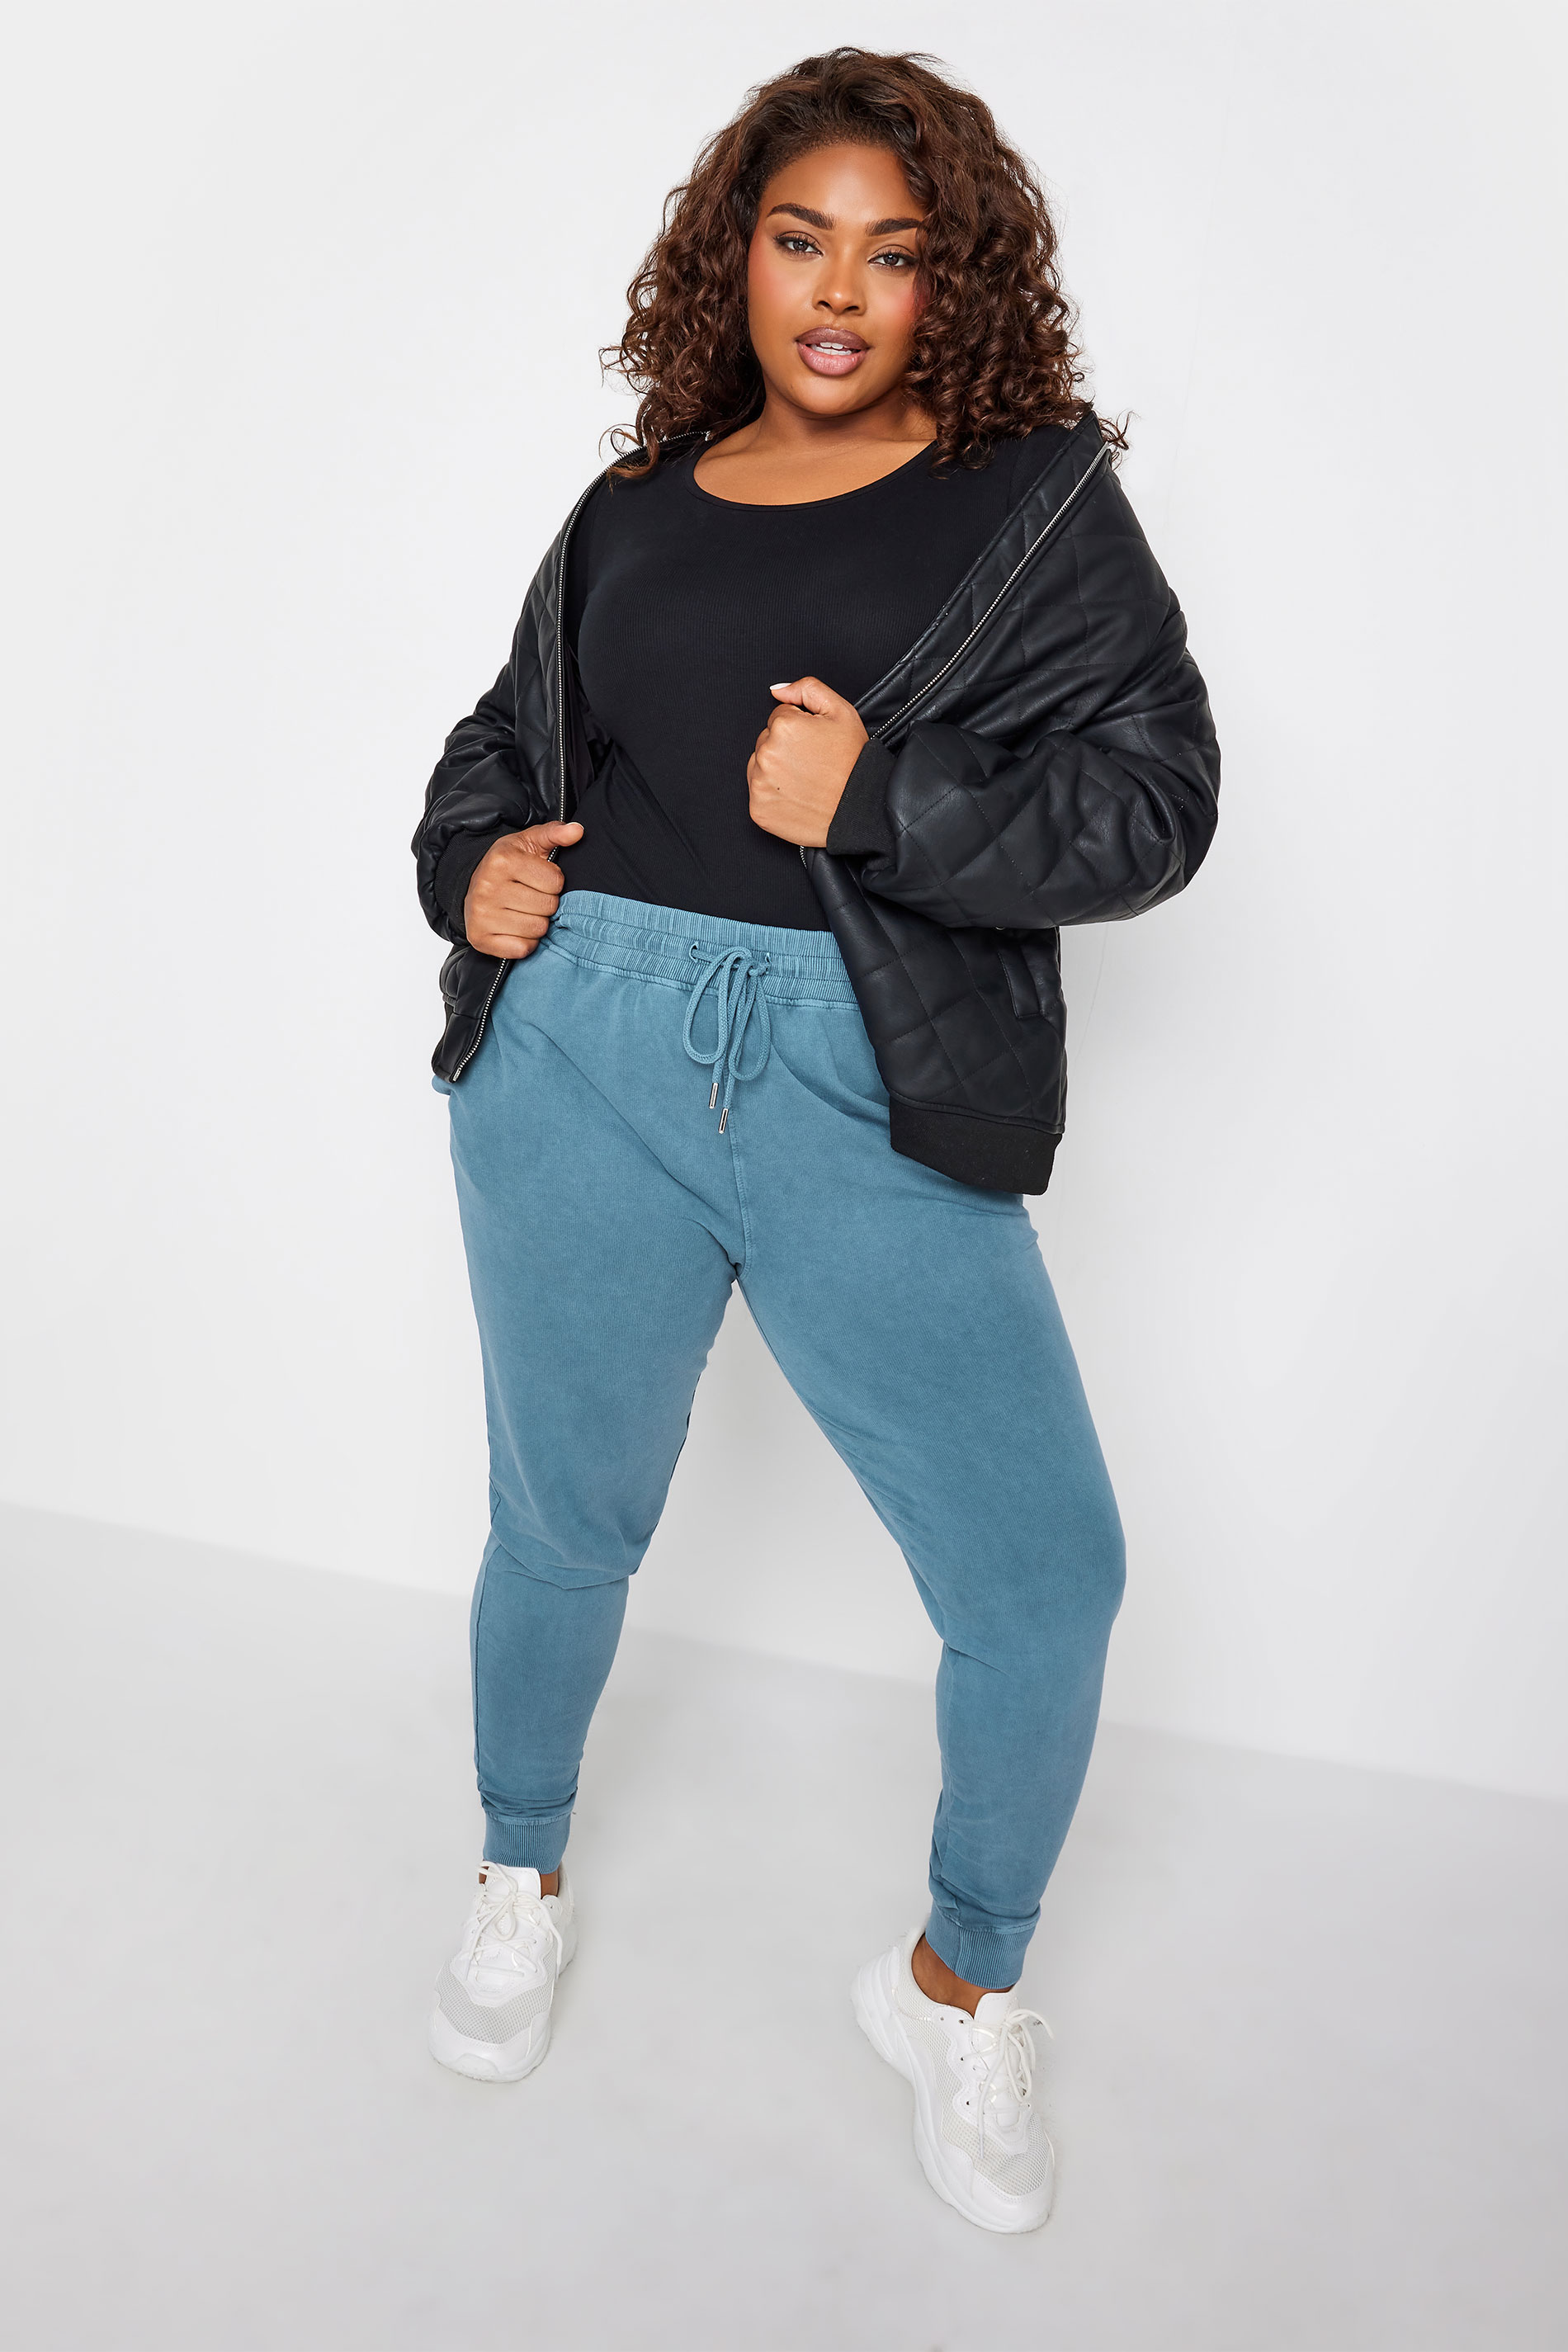 https://cdn.yoursclothing.com/Images/ProductImages/31cc9293-bb56-45_302590_B.jpg